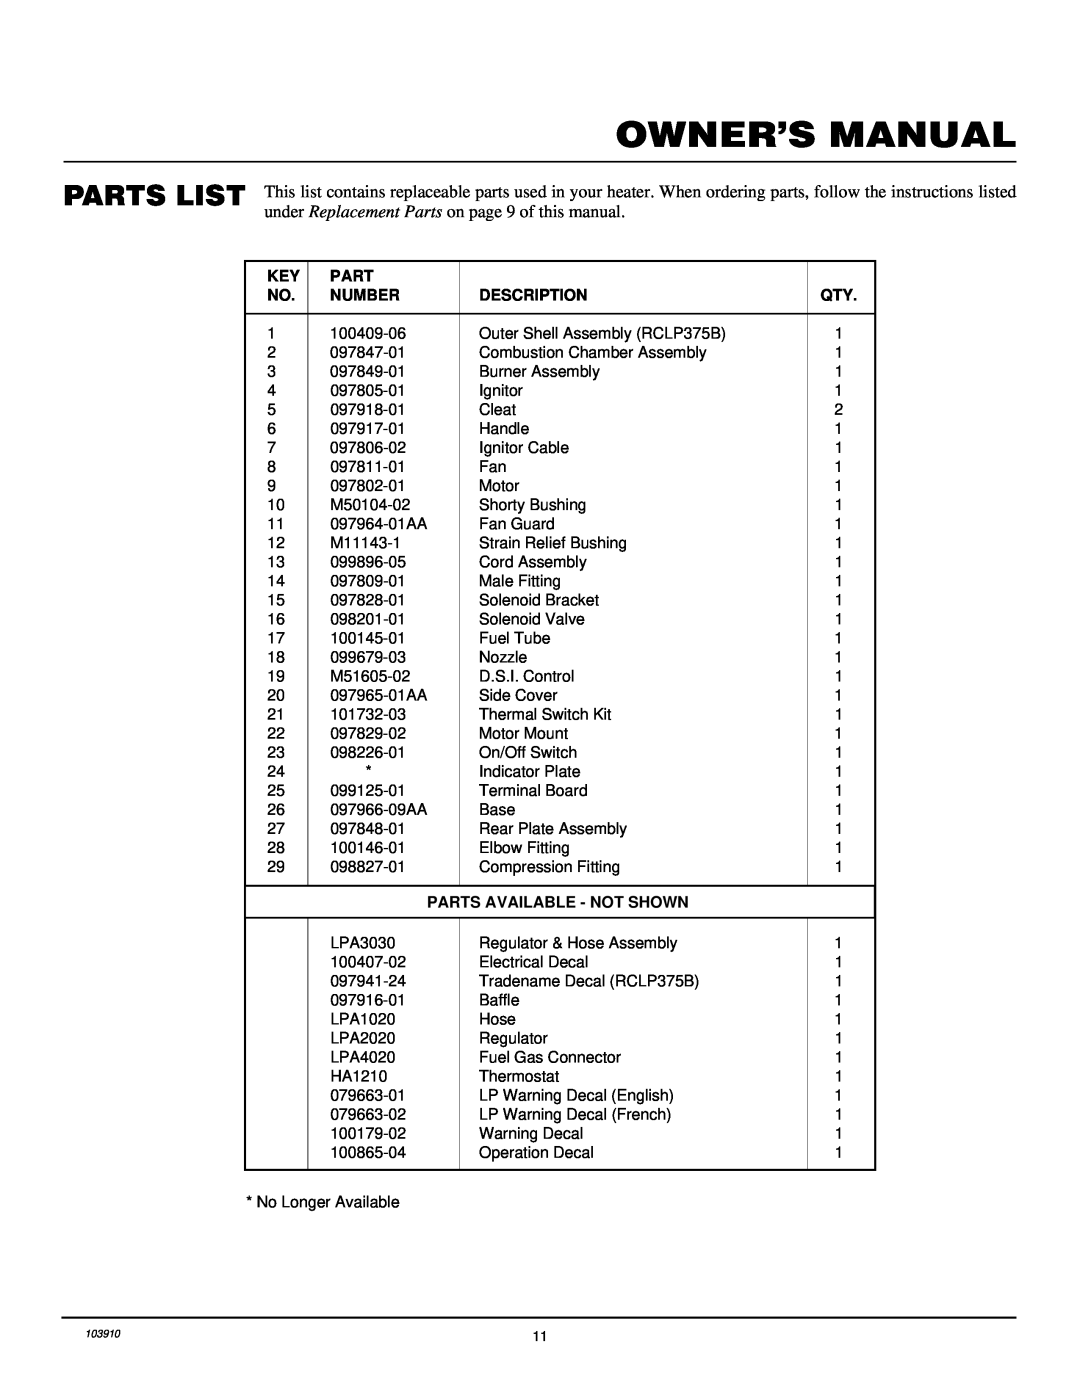 Desa RCLP375B owner manual Parts List, under Replacement Parts on page 9 of this manual 